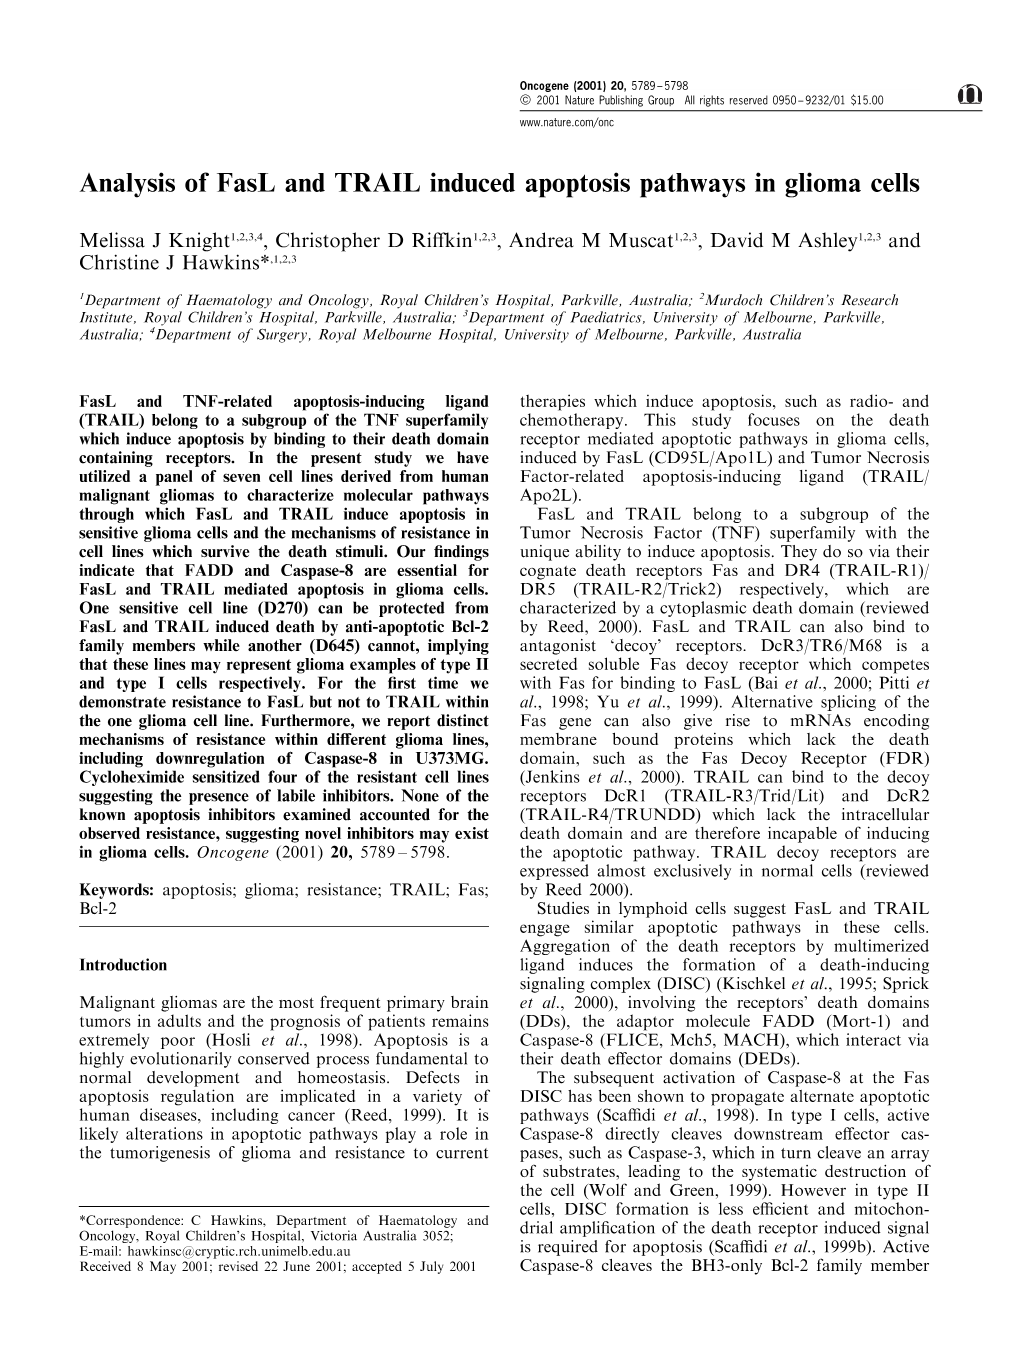 Analysis of Fasl and TRAIL Induced Apoptosis Pathways in Glioma Cells